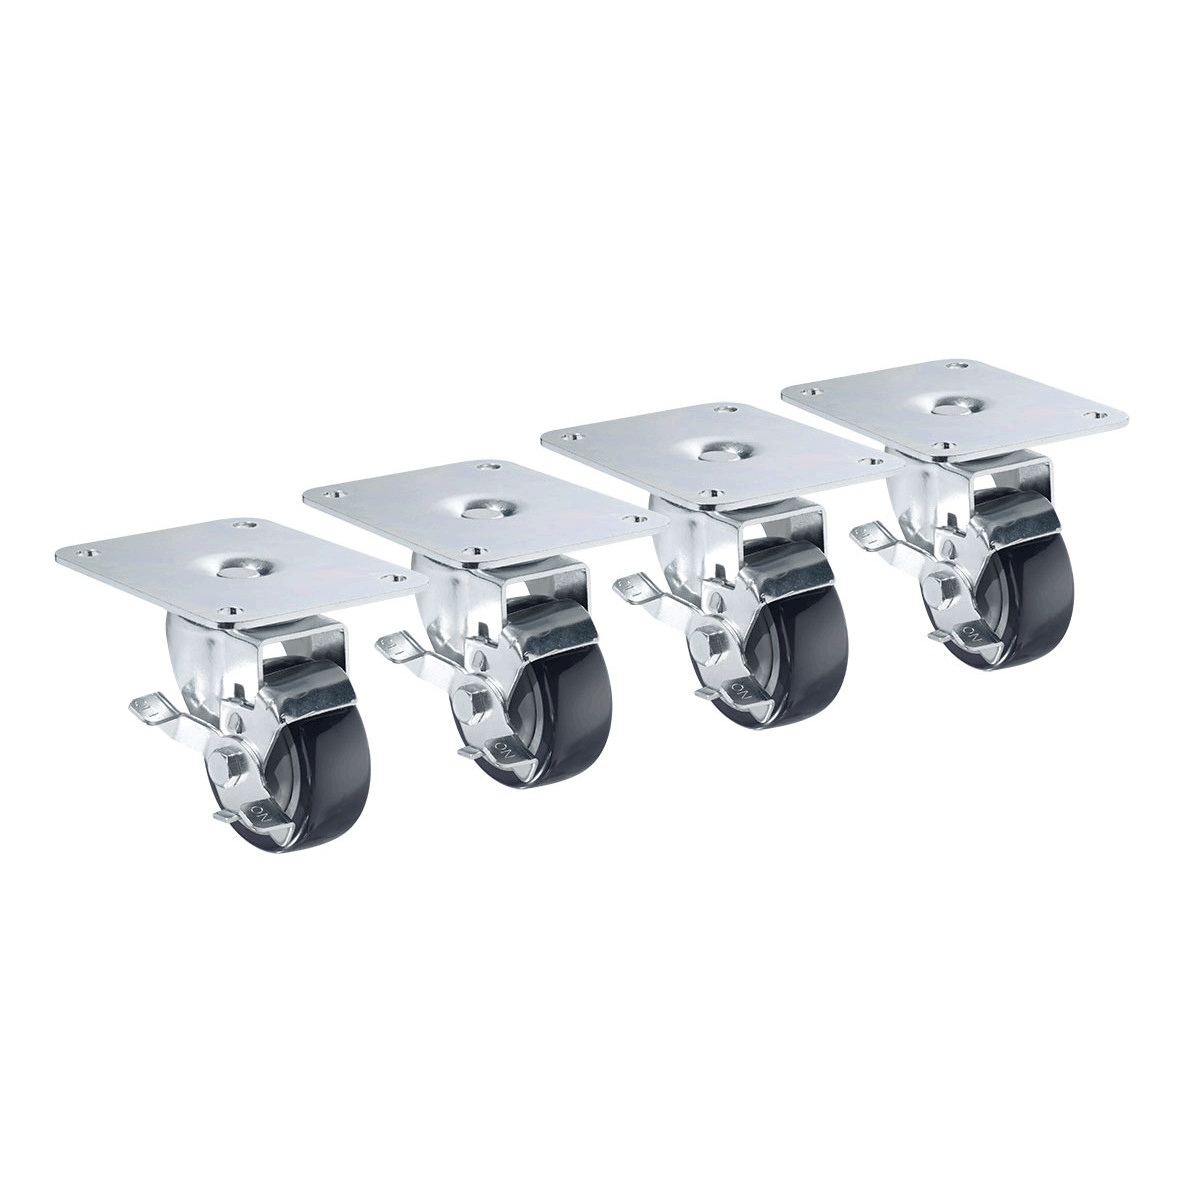 Krowne Metal 28-170S 4" x 5" Plate Caster with 3" Wheel (Set of 4)